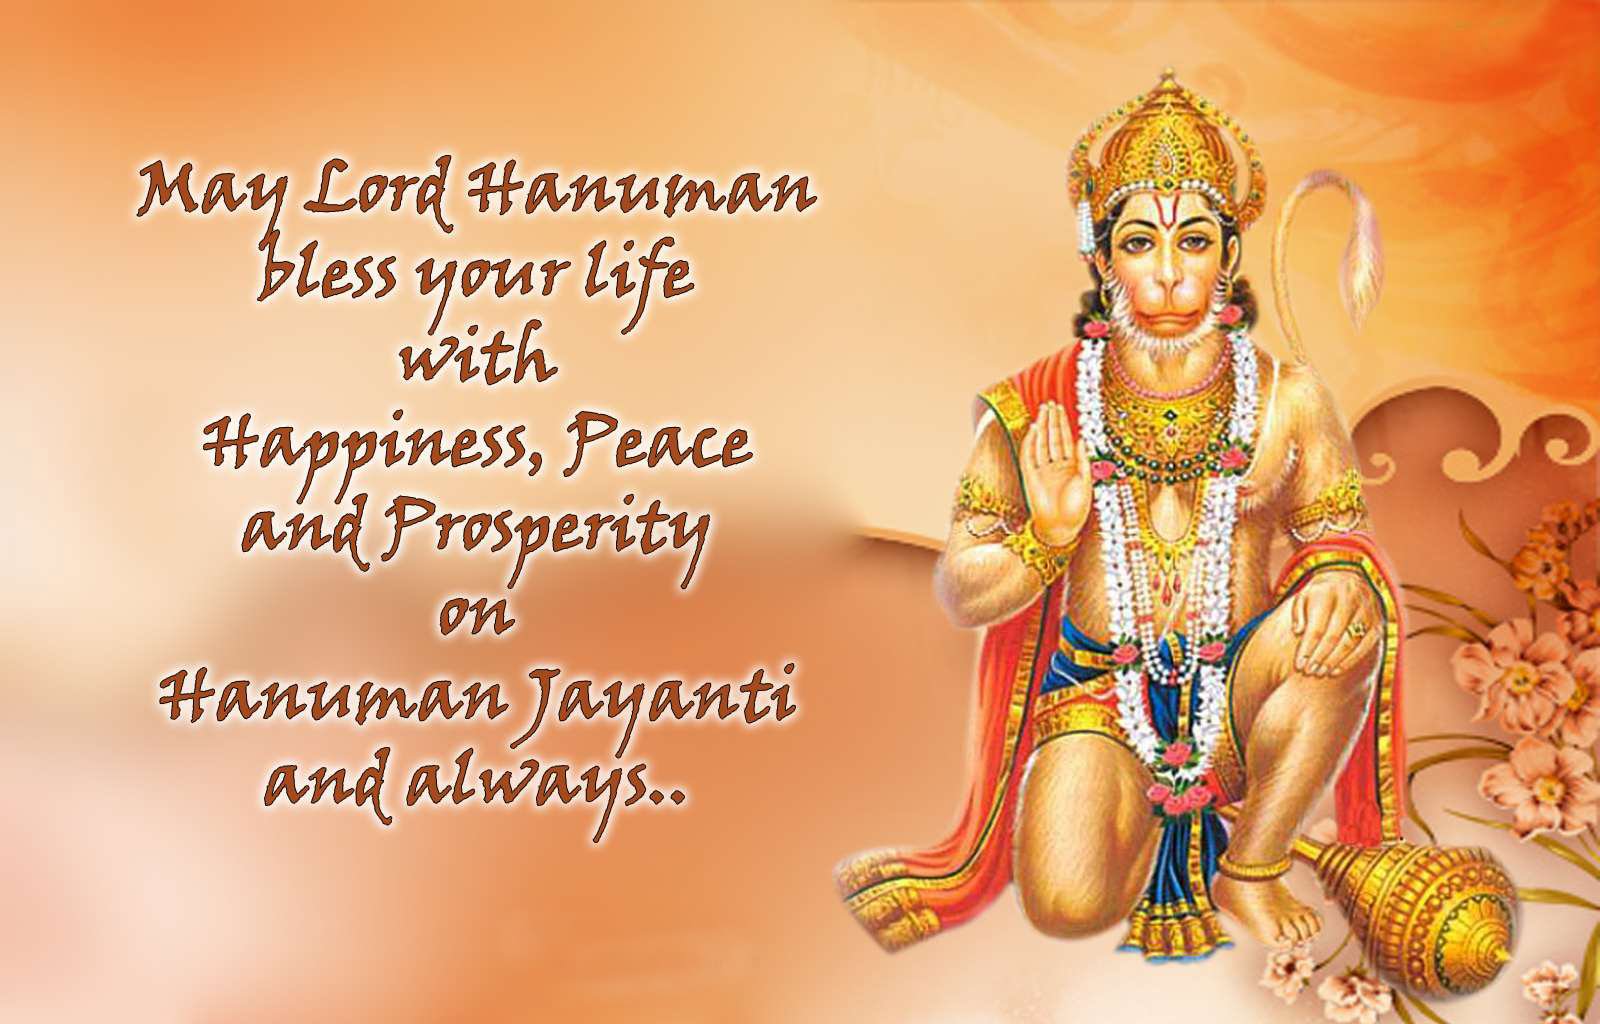 May Lord Hanuman Bless Your Life With Happiness, Peace And Prosperity On Hanuman Jayanti And Always